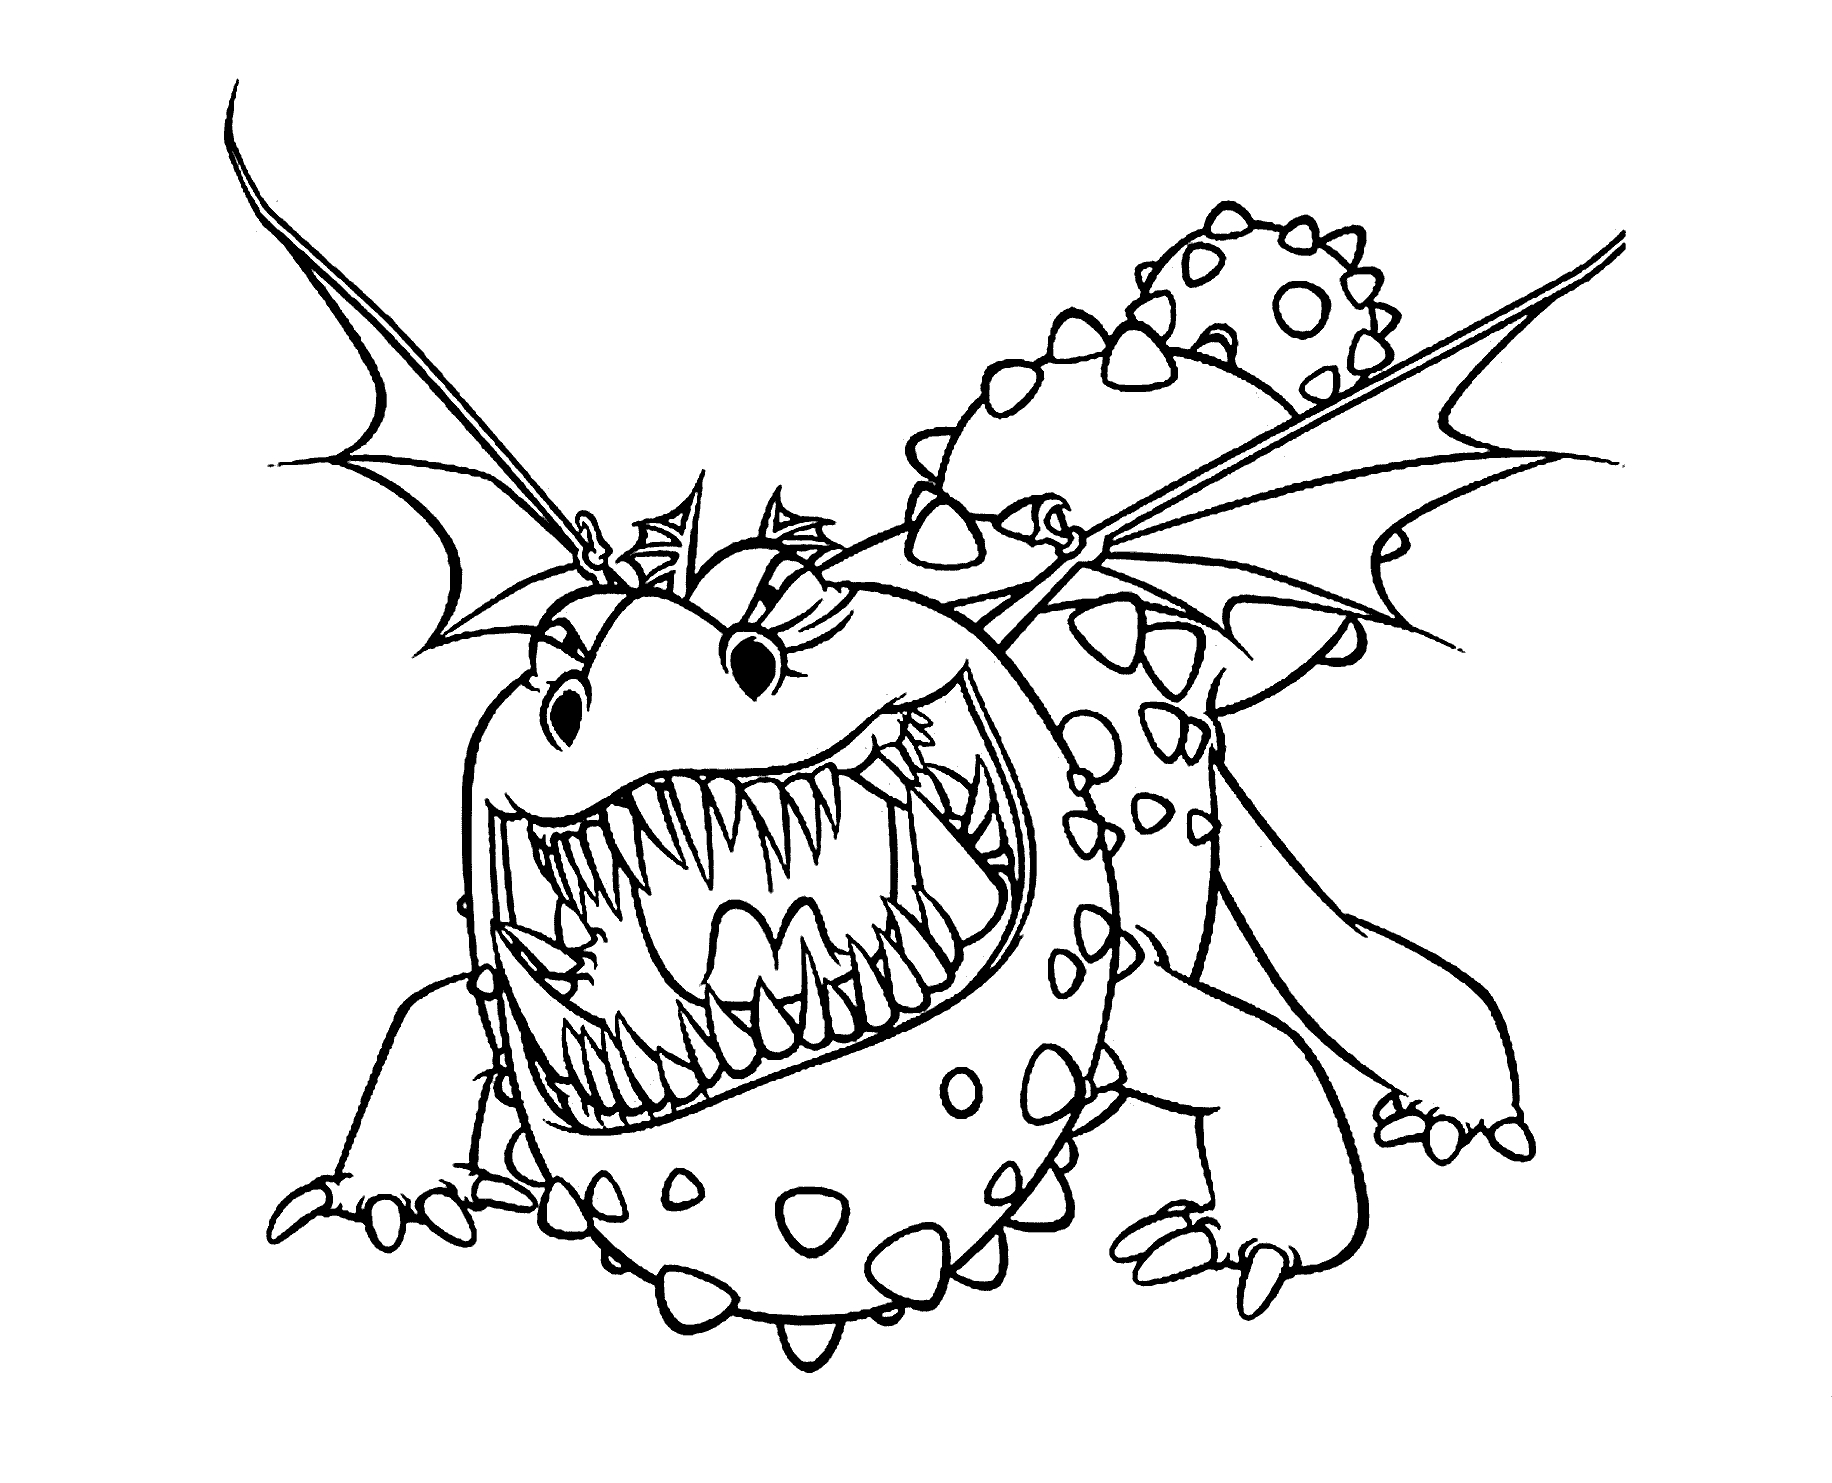 How To Print Coloring Pages Cartoon Dragons Coloring Pages To Print Coloring Pages For All